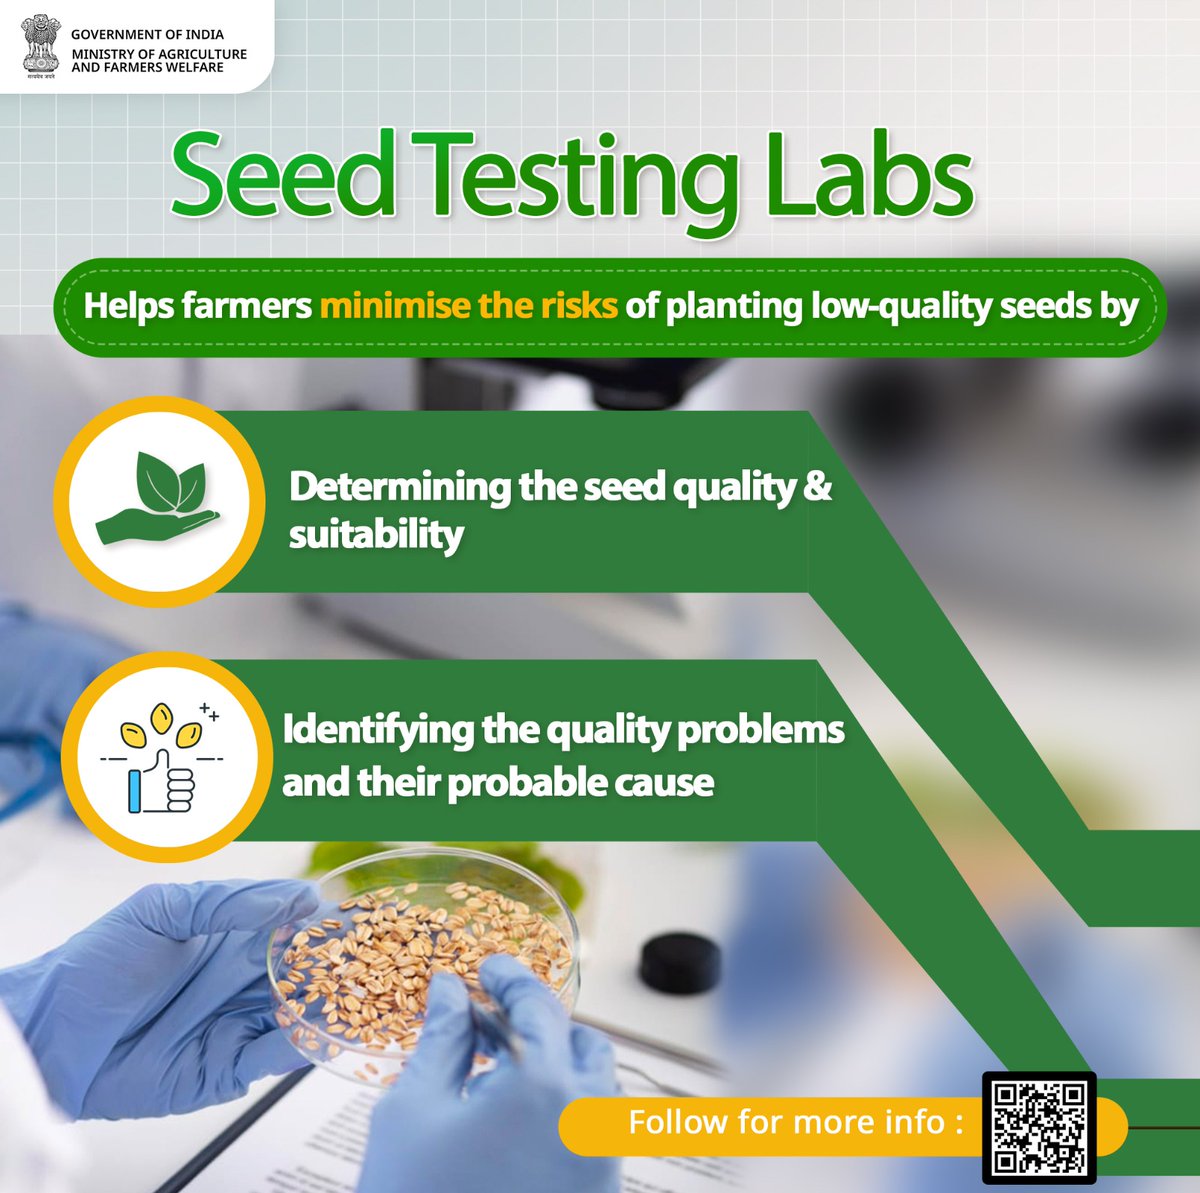 Seed Testing Labs provide farmers with crucial insights into the quality, viability, & purity of their seeds, ensuring optimal crop yields & minimizing potential losses due to poor seed performance.

#agrigoi #seeds #seedsforthefuture #seedtreatment #seedsofchange #FarmersFirst